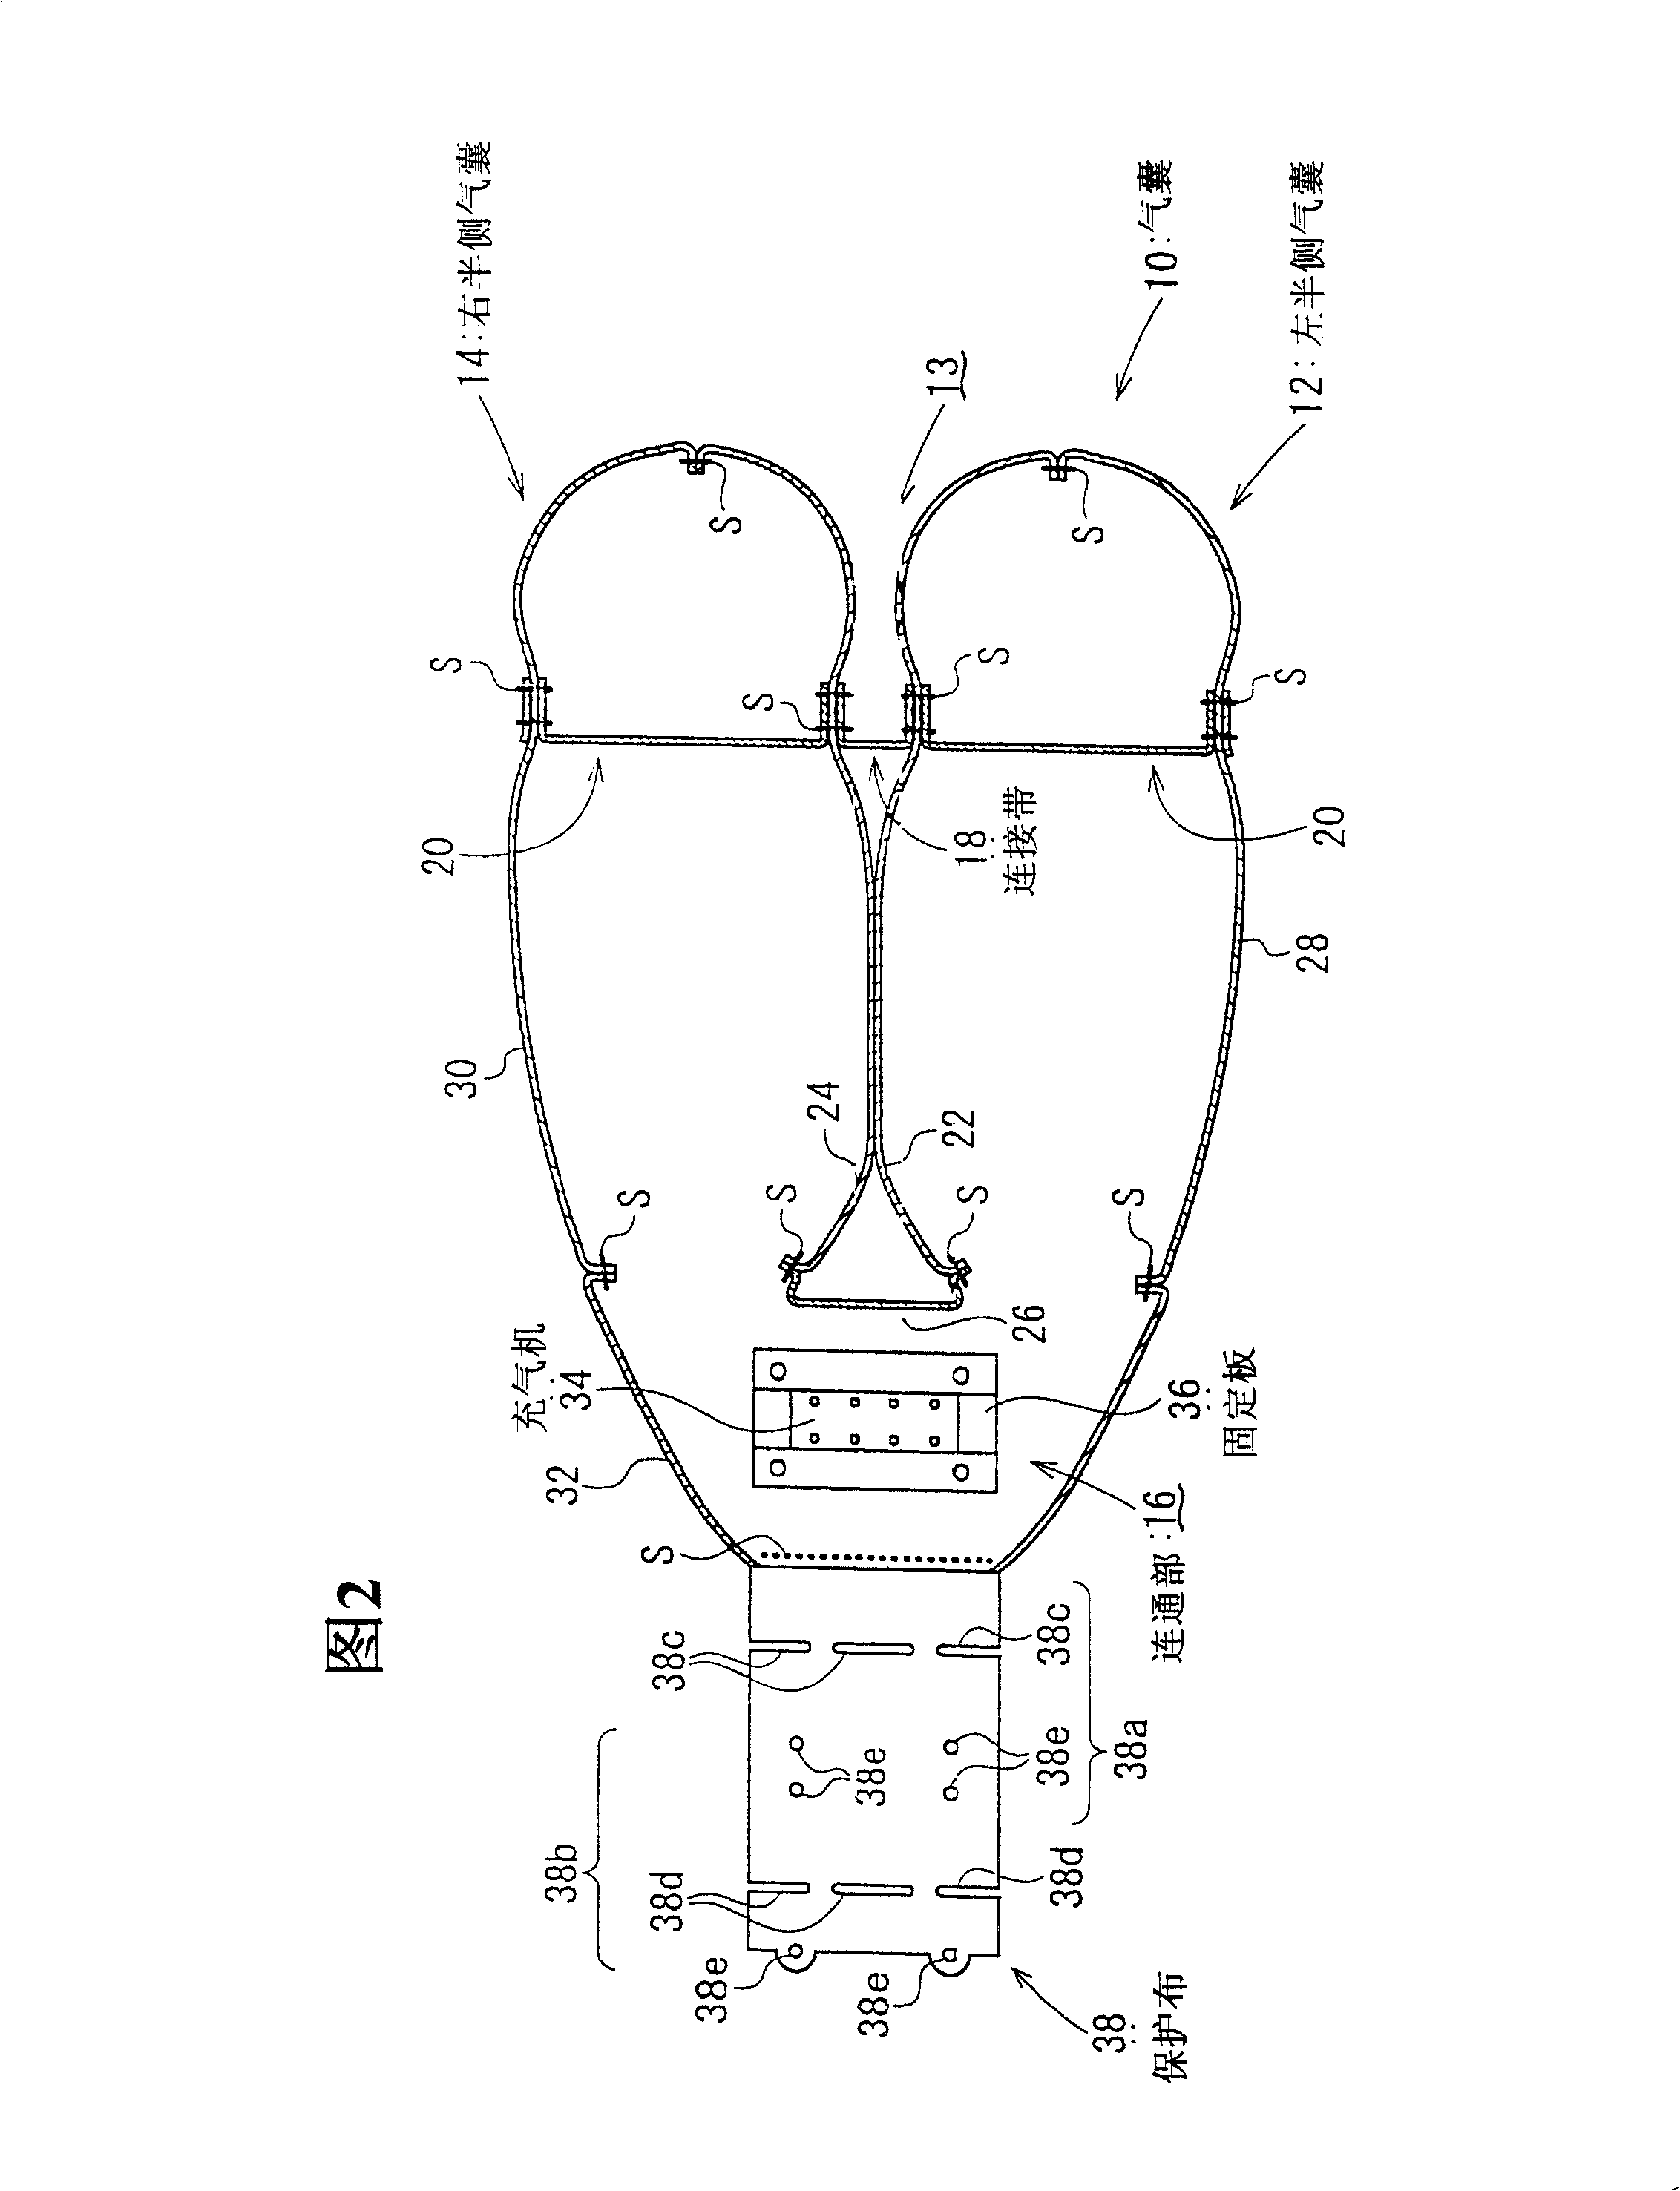 Airbag apparatus and method of folding an airbag